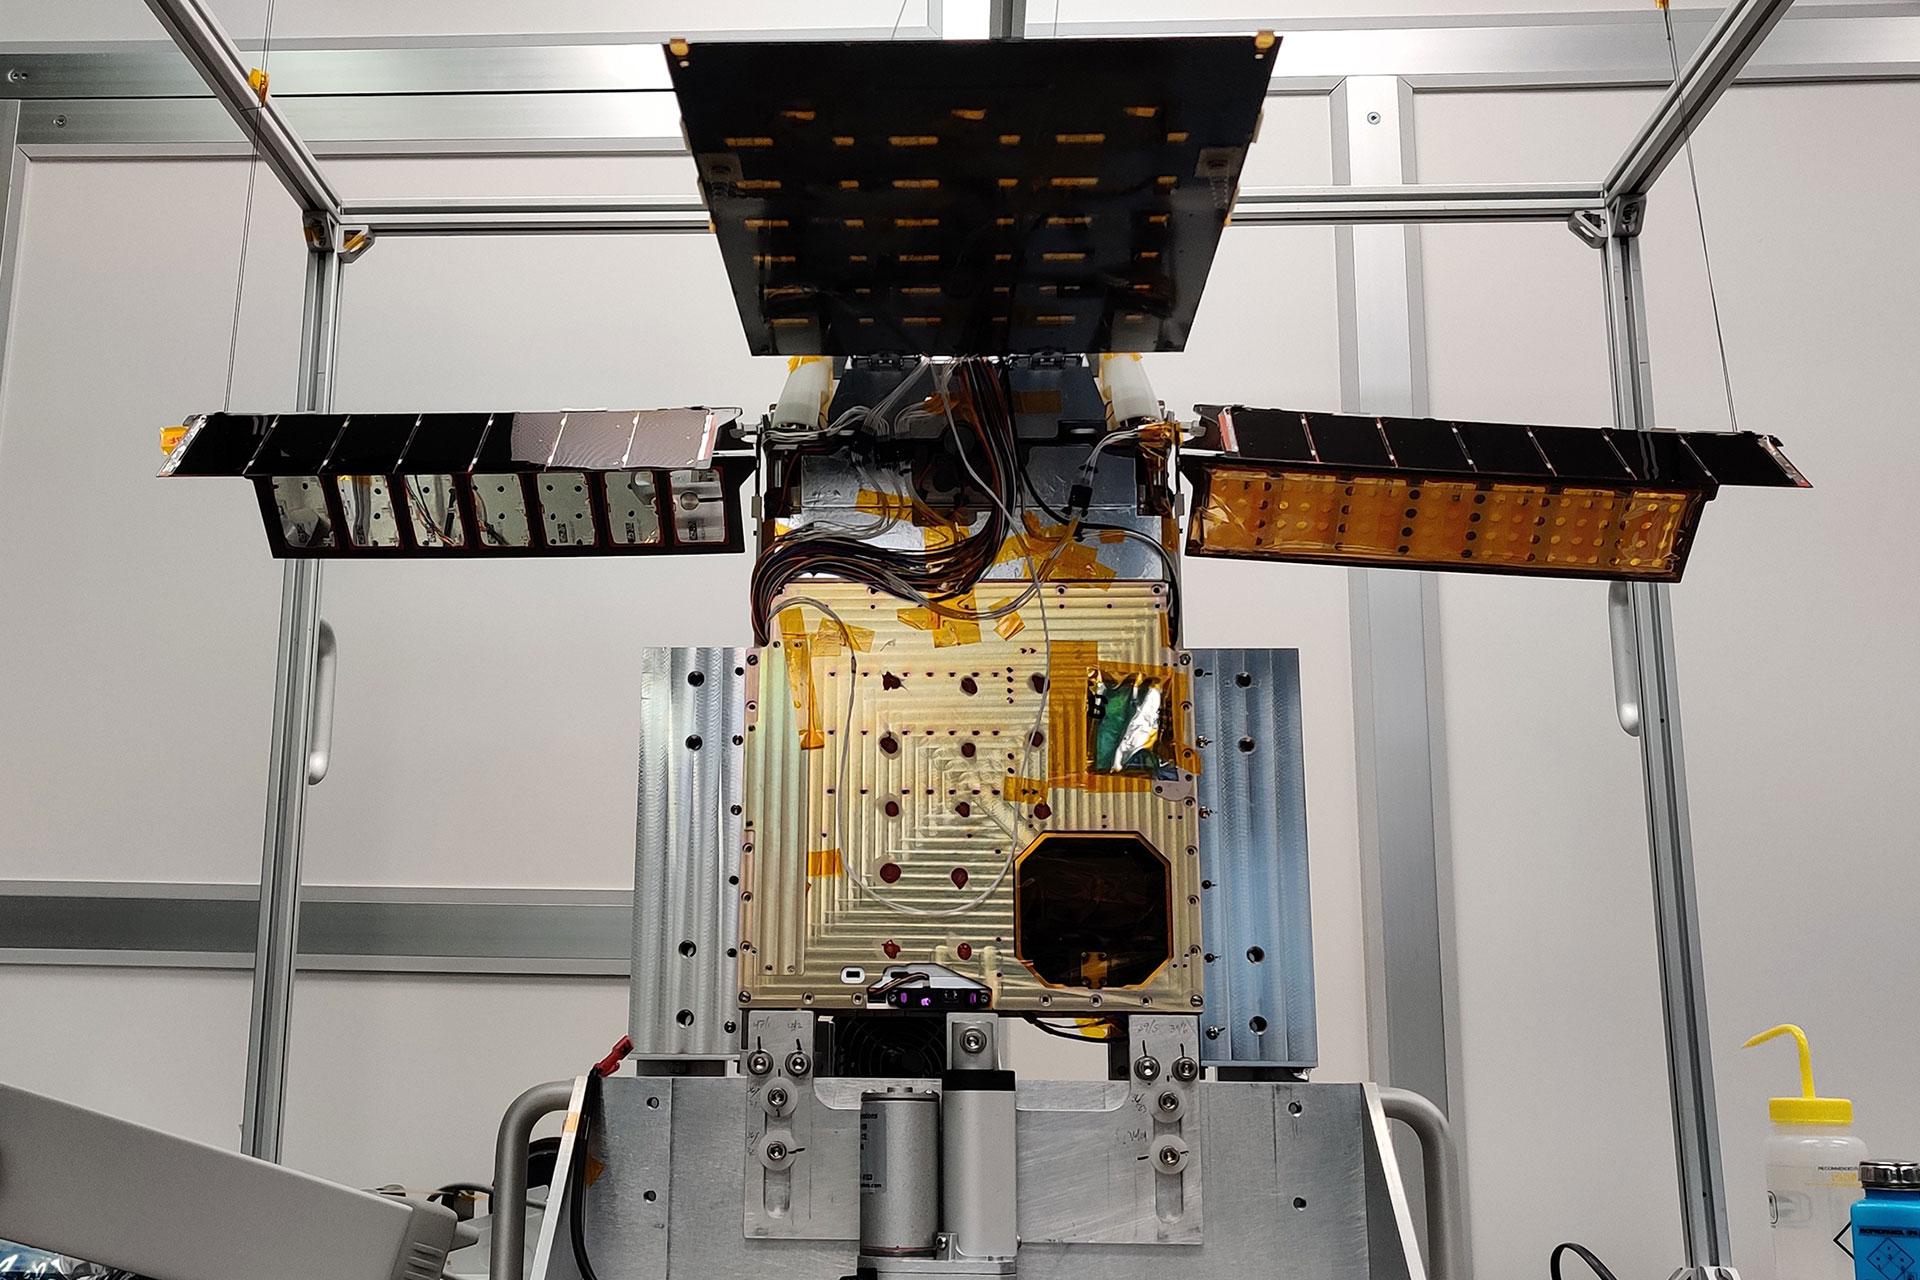 The Lunar Flashlight is shown here at the end of the solar array deployment test. The solar arrays will be stowed for launch and will automatically deploy when the spacecraft is released. (Credit: Conner Awald)